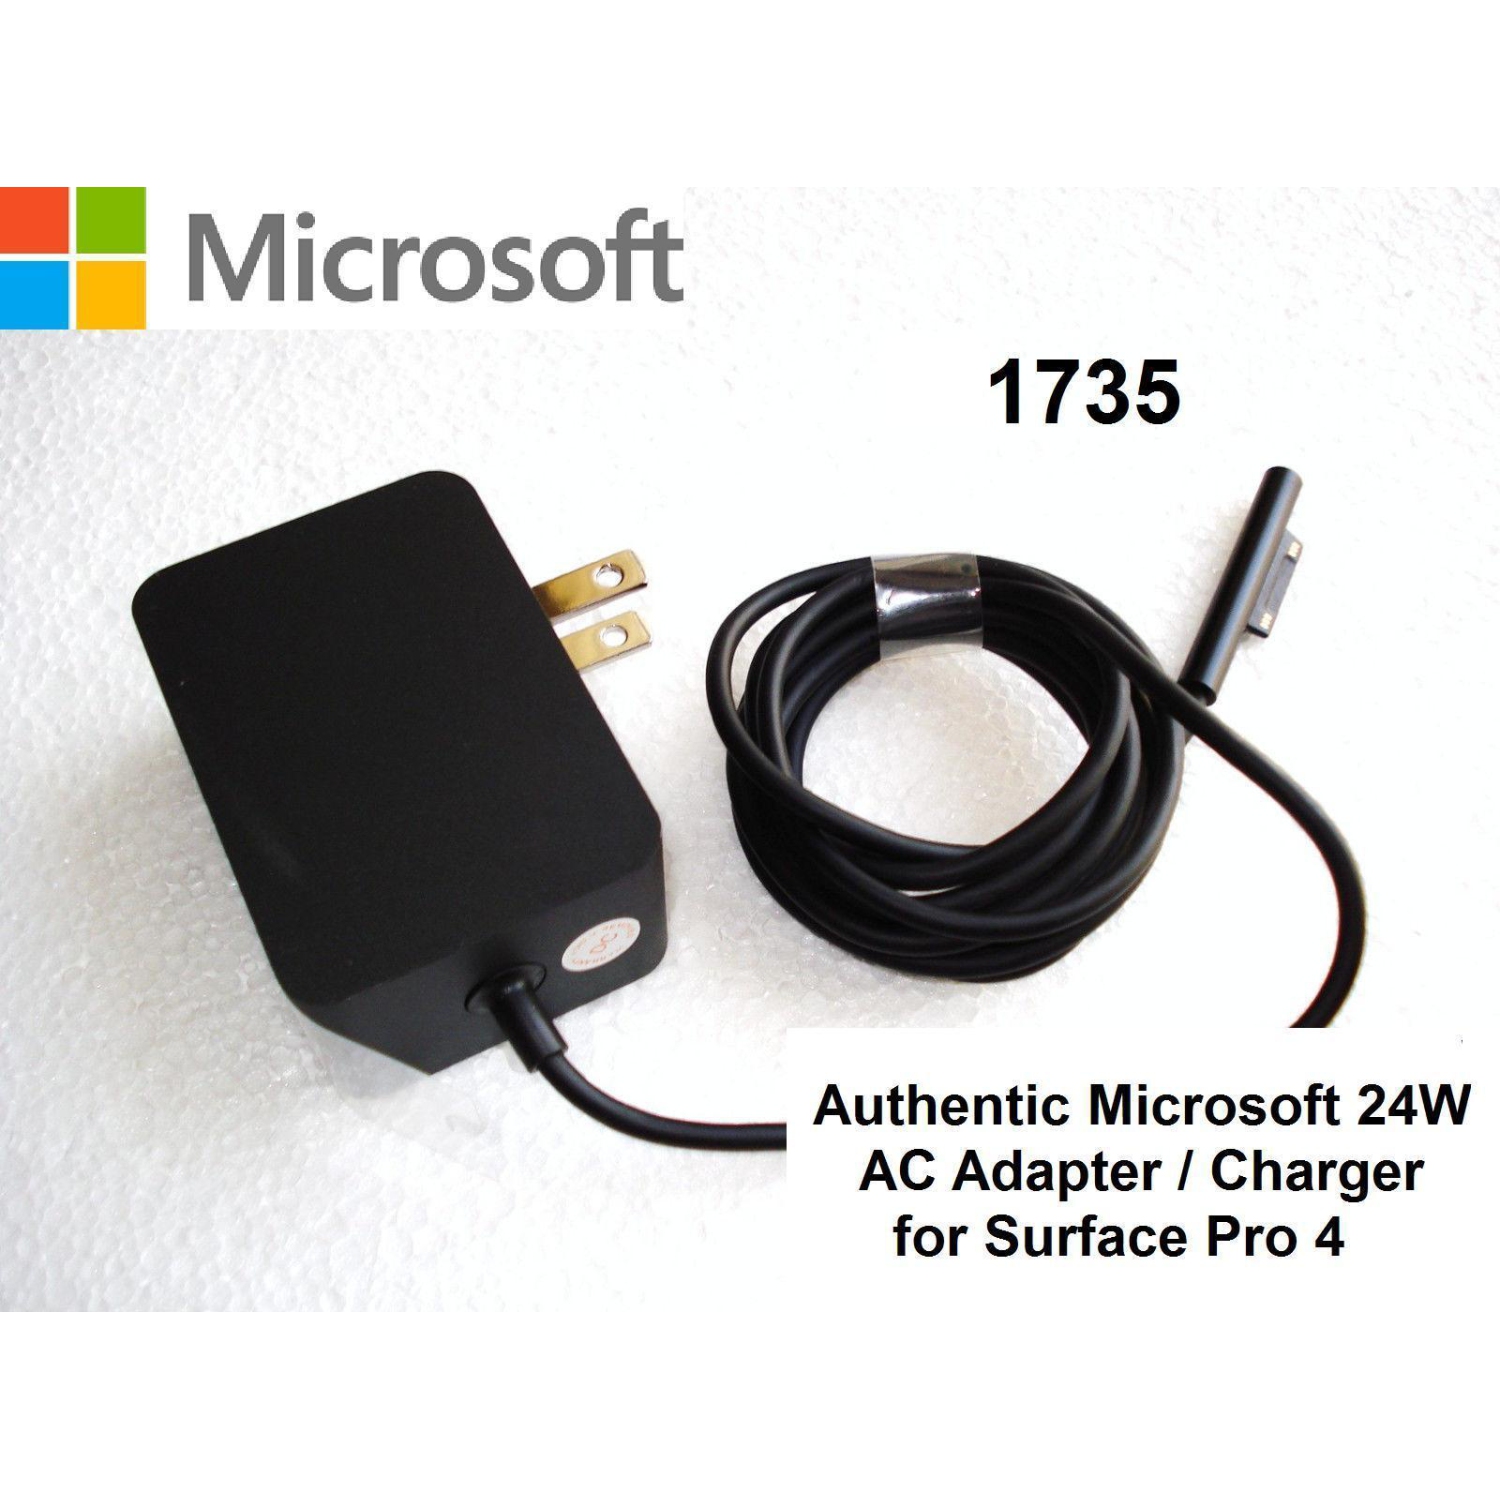 New Genuine Microsoft Surface Pro 4 AC Adapter Charger Surface 1735 15V 1.6A 24W